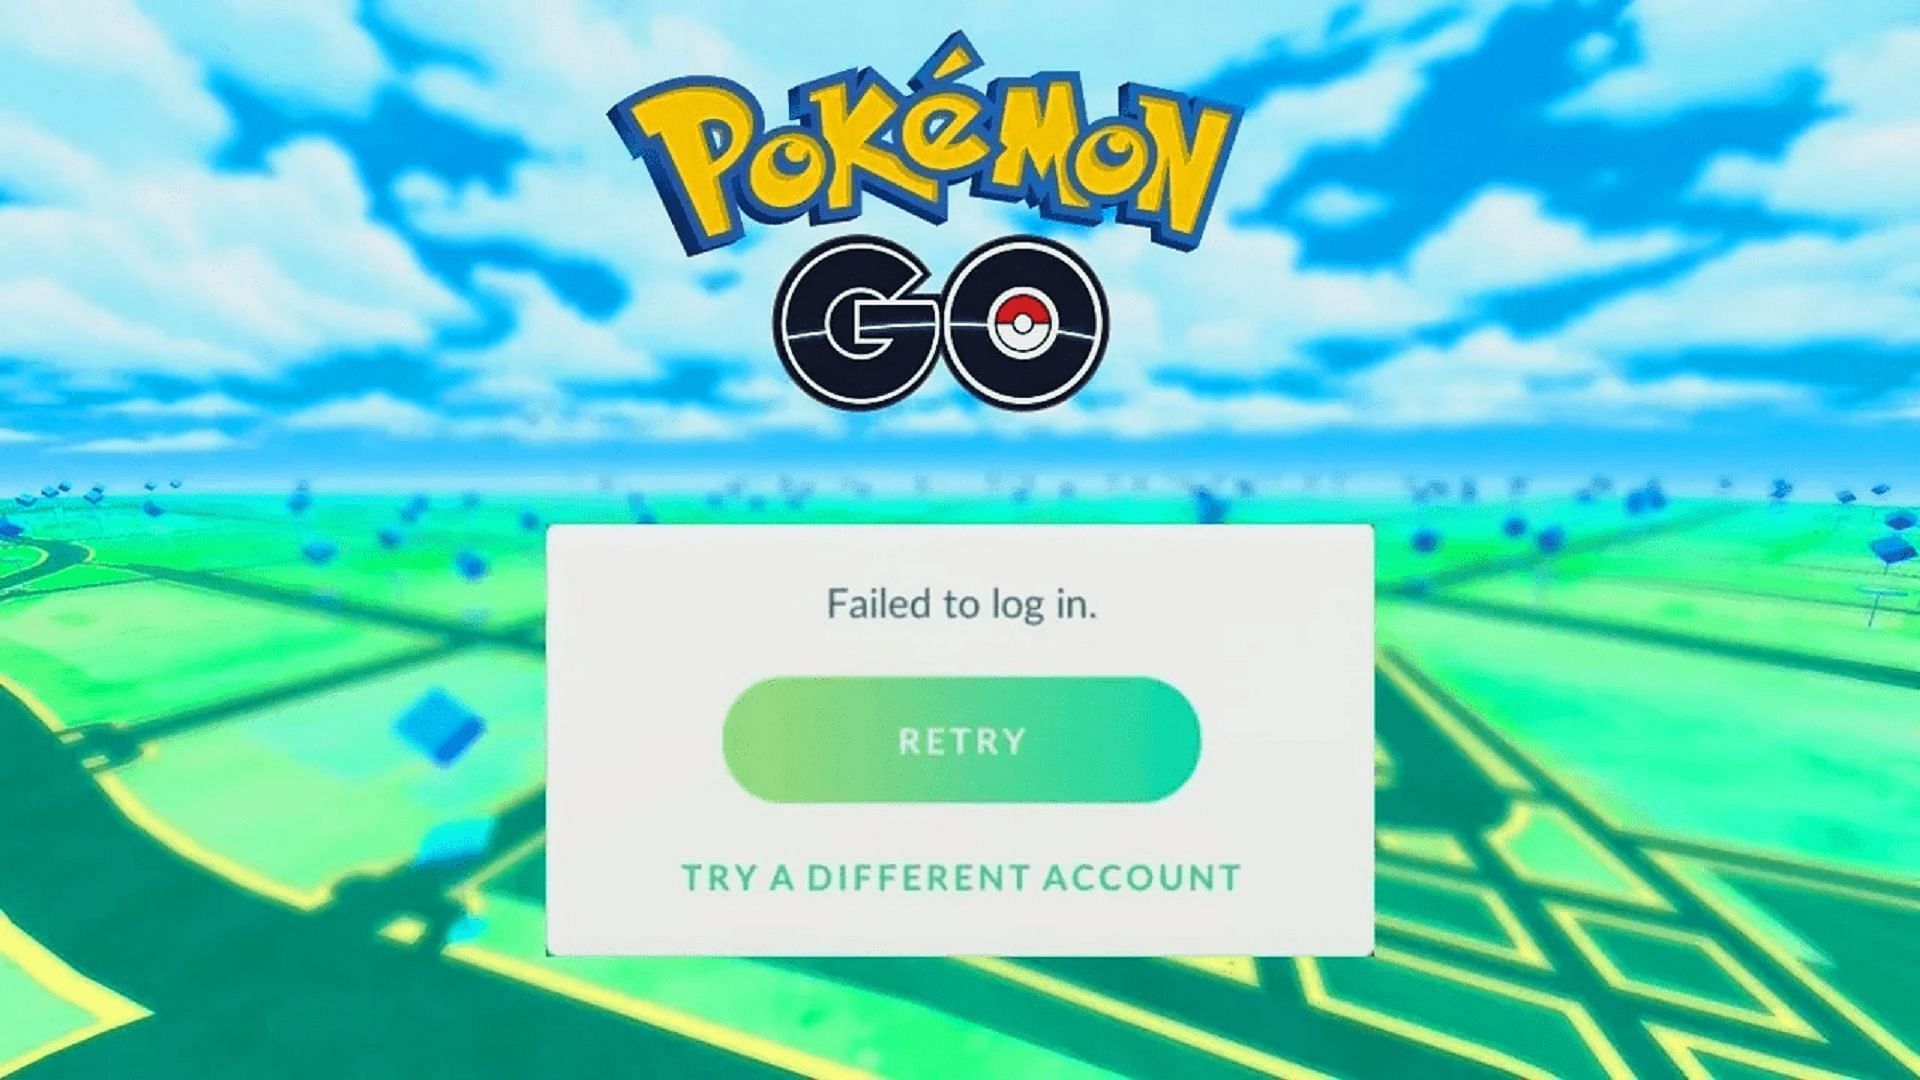 How to Sign Up for Pokemon Go Trainer Club 